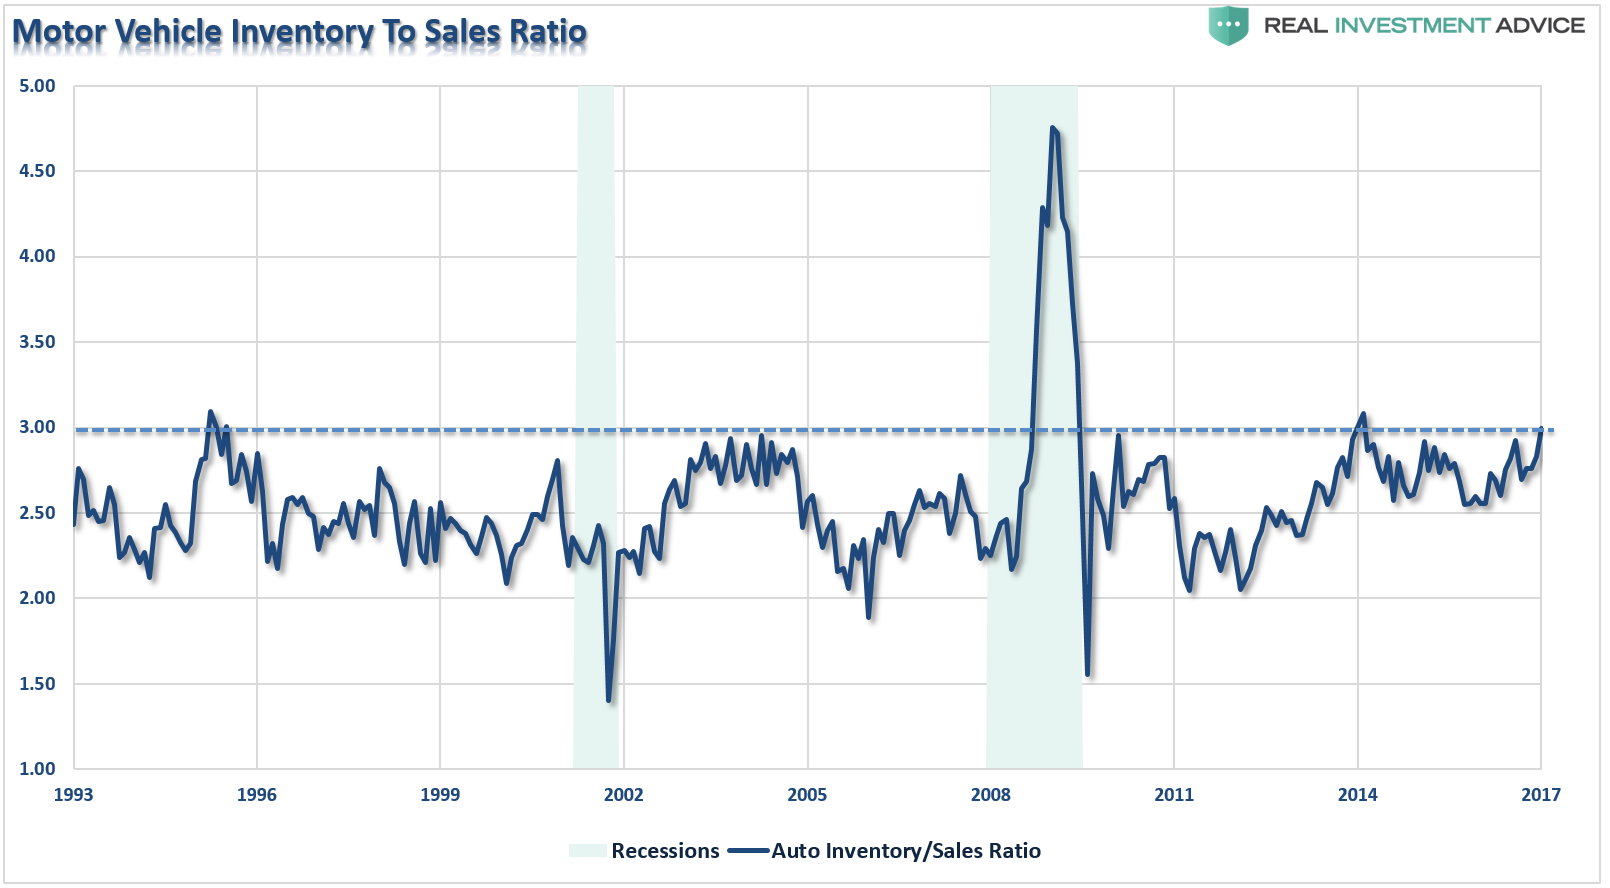 Motor Vehicle Inventory To Sales Ratio